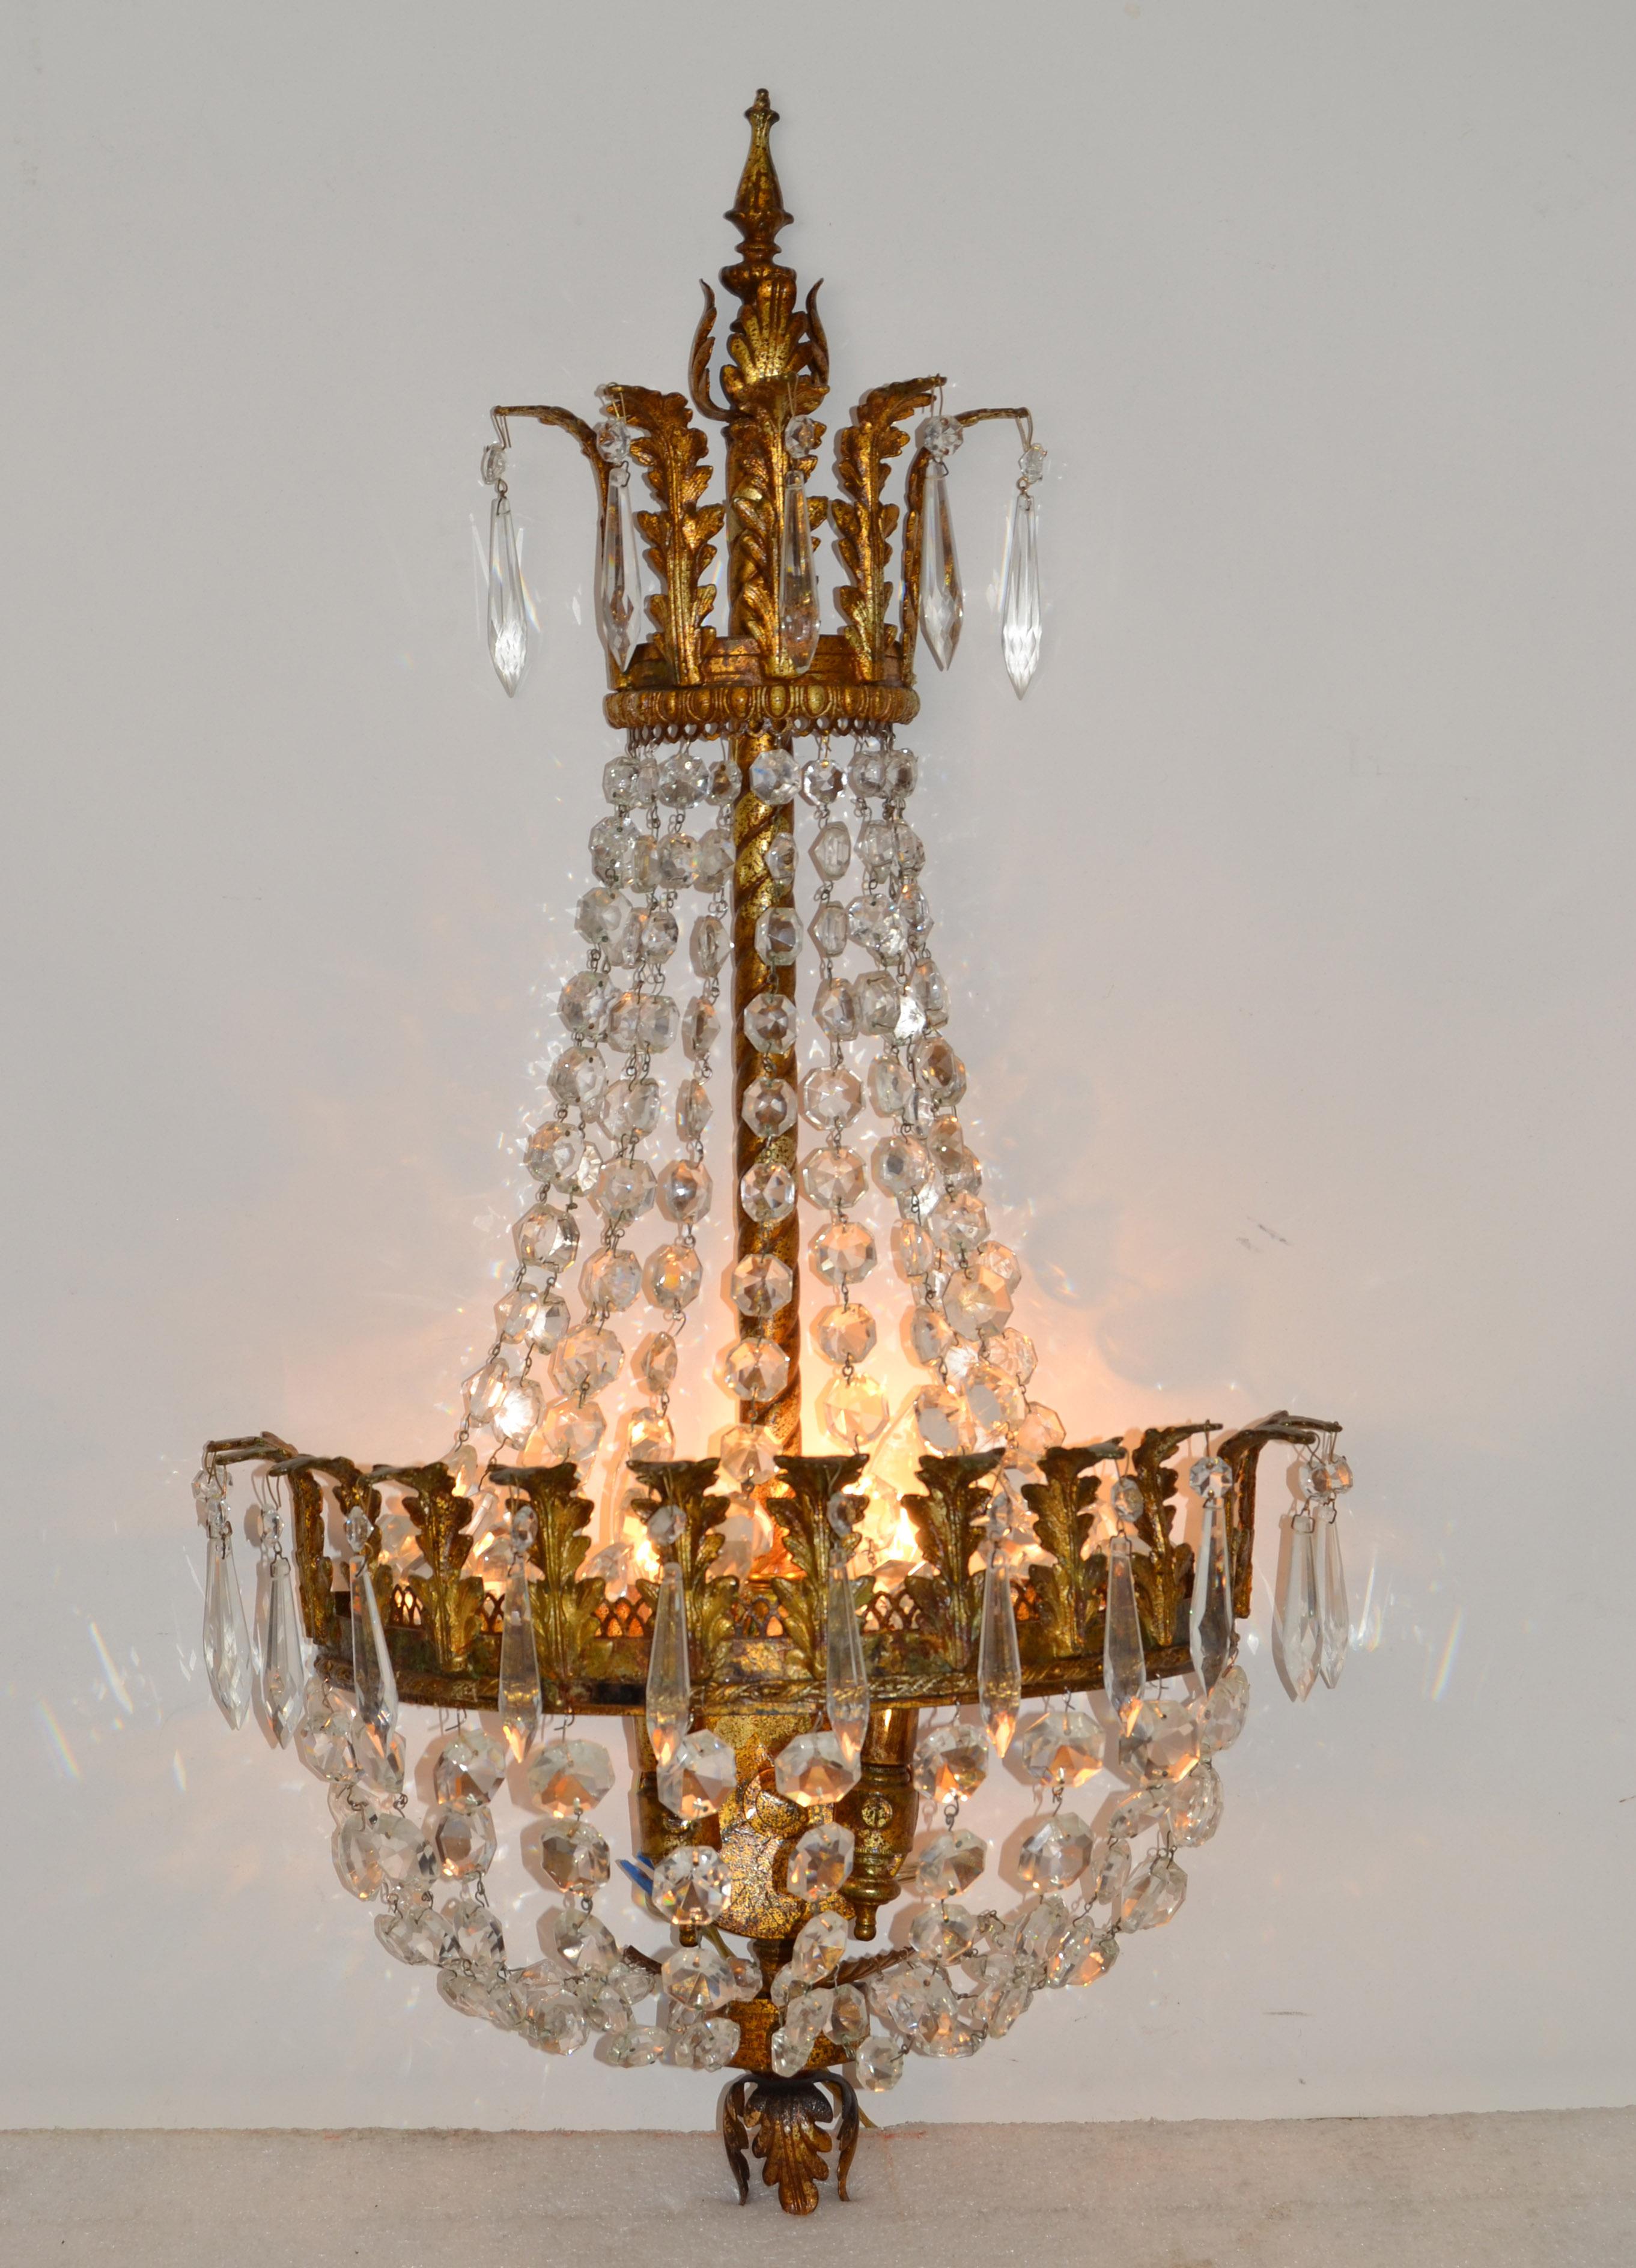 Early Italian Empire Style Gilt Metal Bronze & Crystal 2 Lights Sconce Wall Lamp For Sale 4